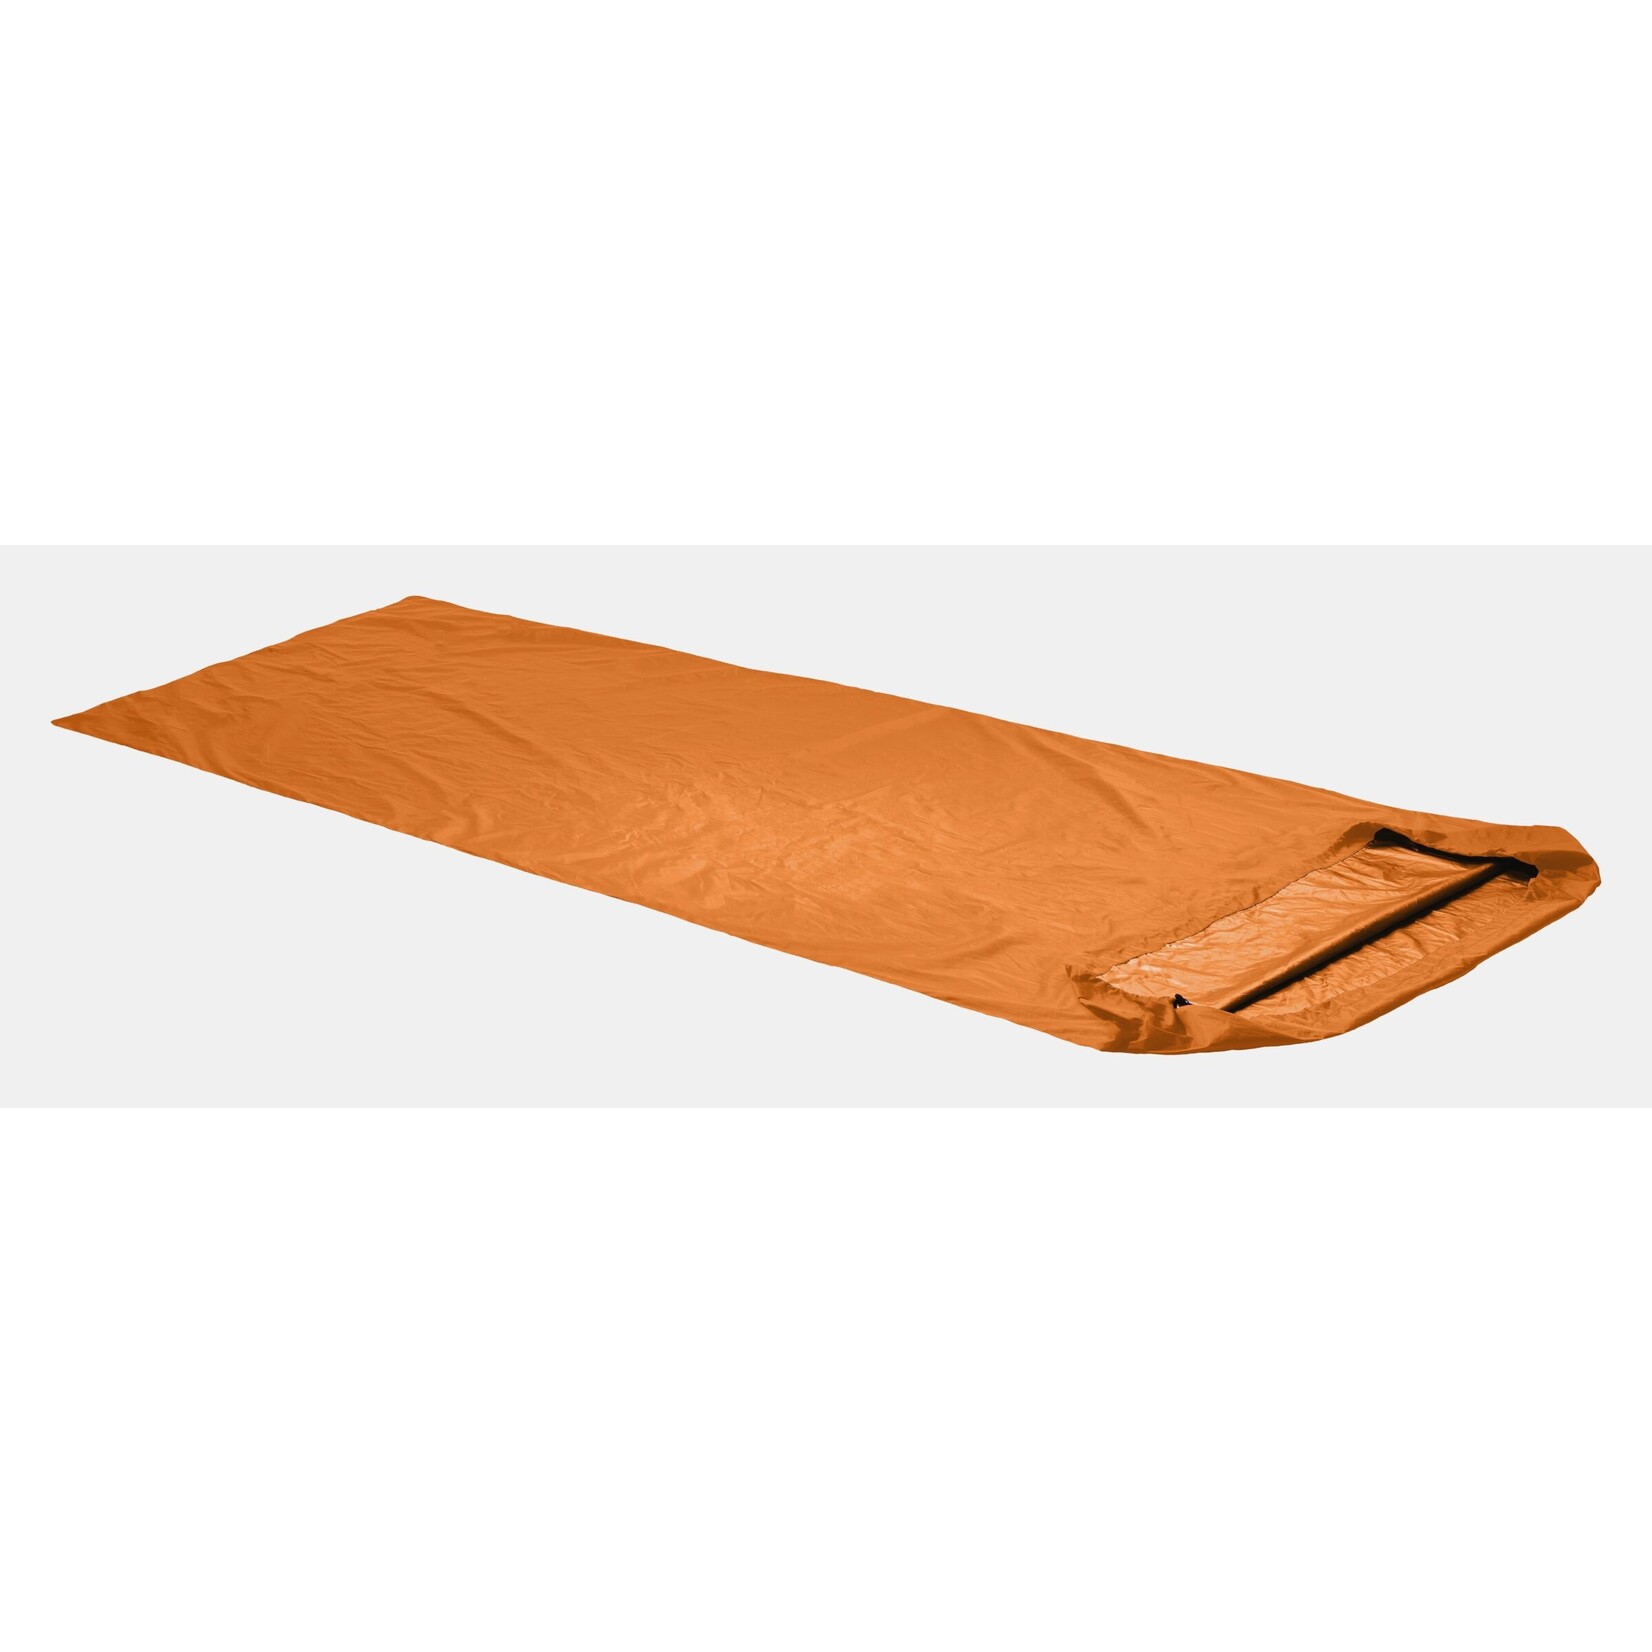 Ortovox NEW Safety Bivy Bag Single Person